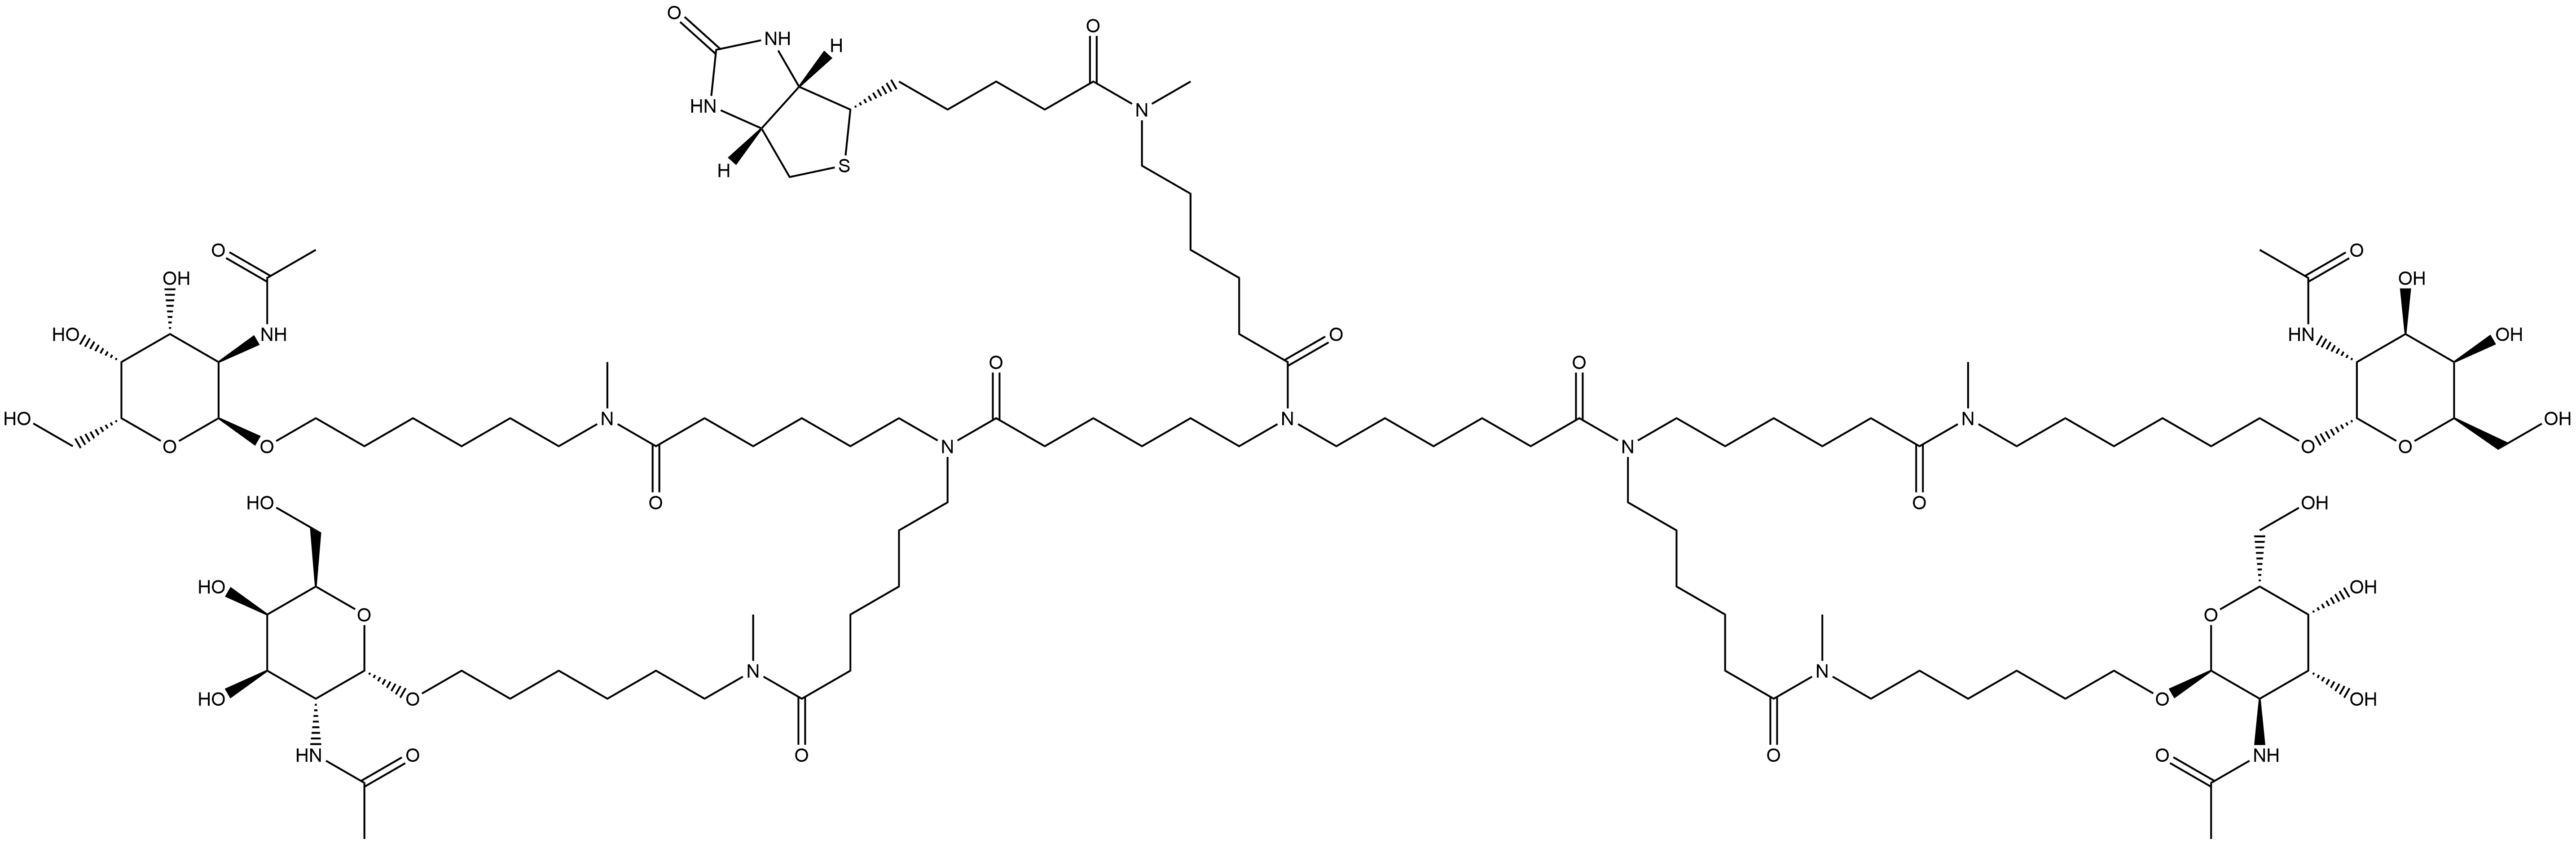 (3aS,4S,6aR)-N-[6-[Bis[6-[bis[6-[[6-[[2-(acetylamino)-2-deoxy-α-D-galactopyranosyl]oxy]hexyl]methylamino]-6-oxohexyl]amino]-6-oxohexyl]amino]-6-oxohexyl]hexahydro-N-methyl-2-oxo-1H-thieno[3,4-d]imidazole-4-pentanamide Structure